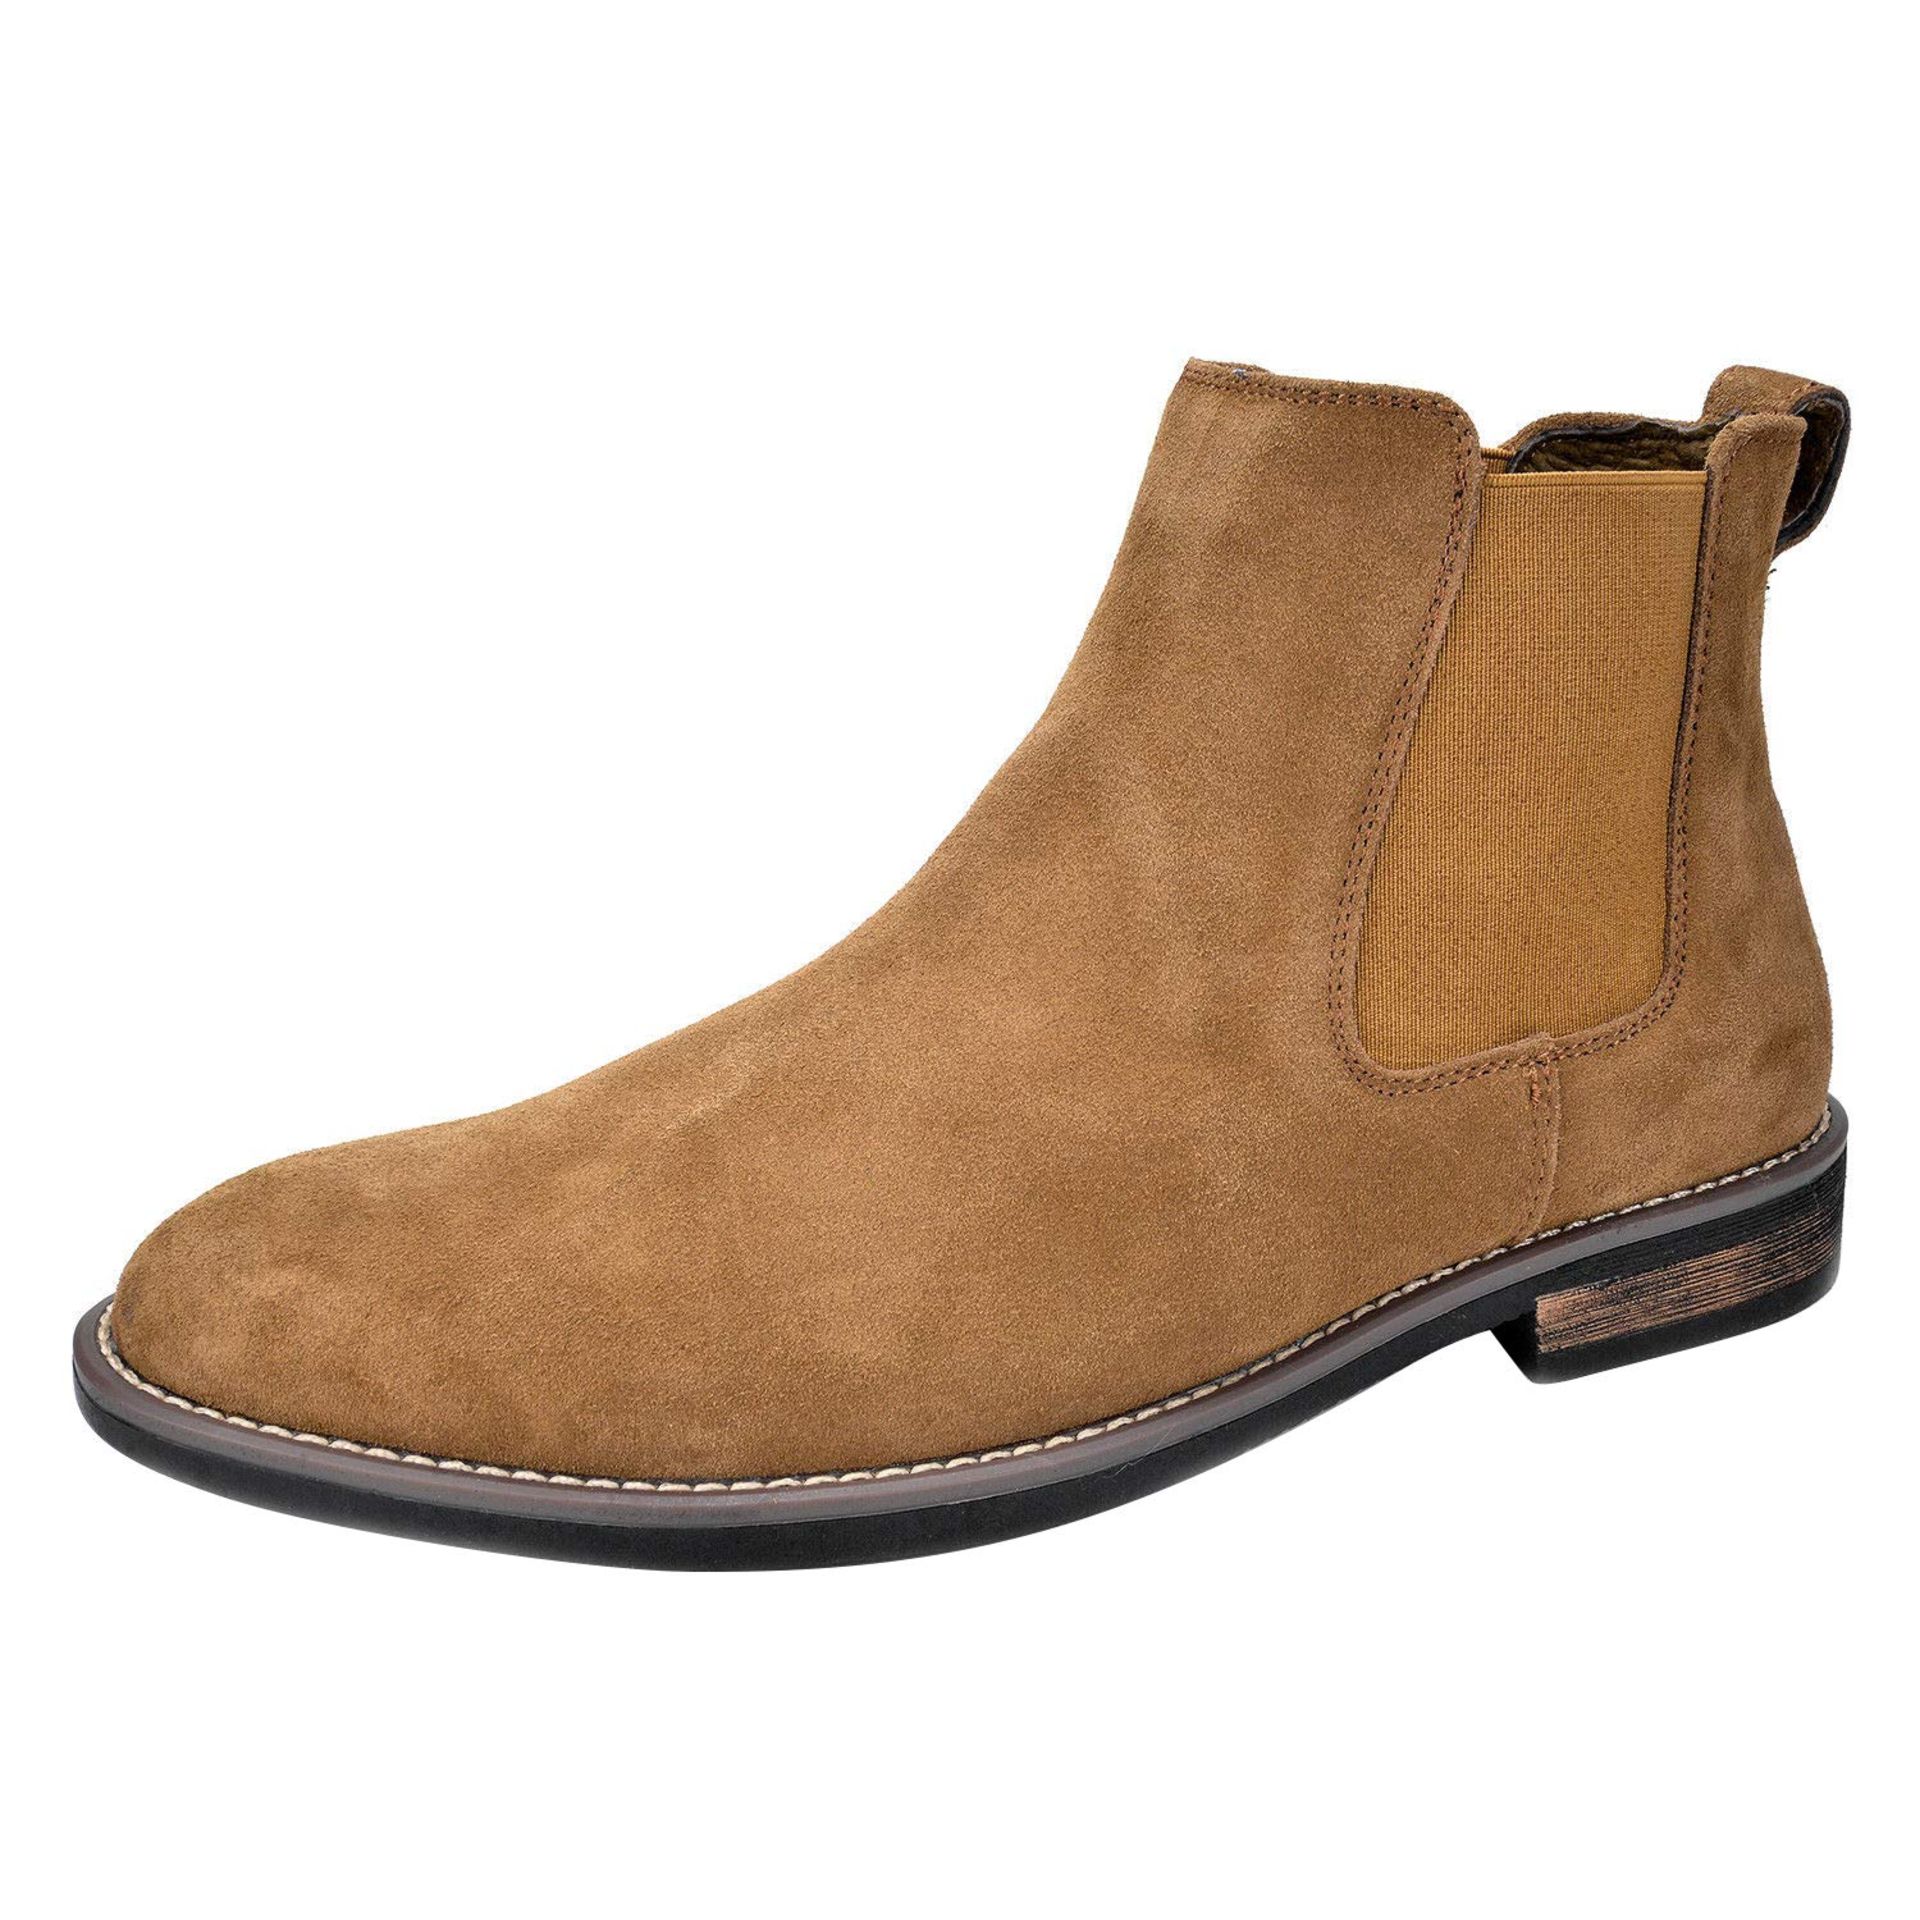 RRP £45.02 Bruno Marc Men's Urban-06 Suede Leather Chelsea Ankle Boots,Size 8,TAN,URBAN-06